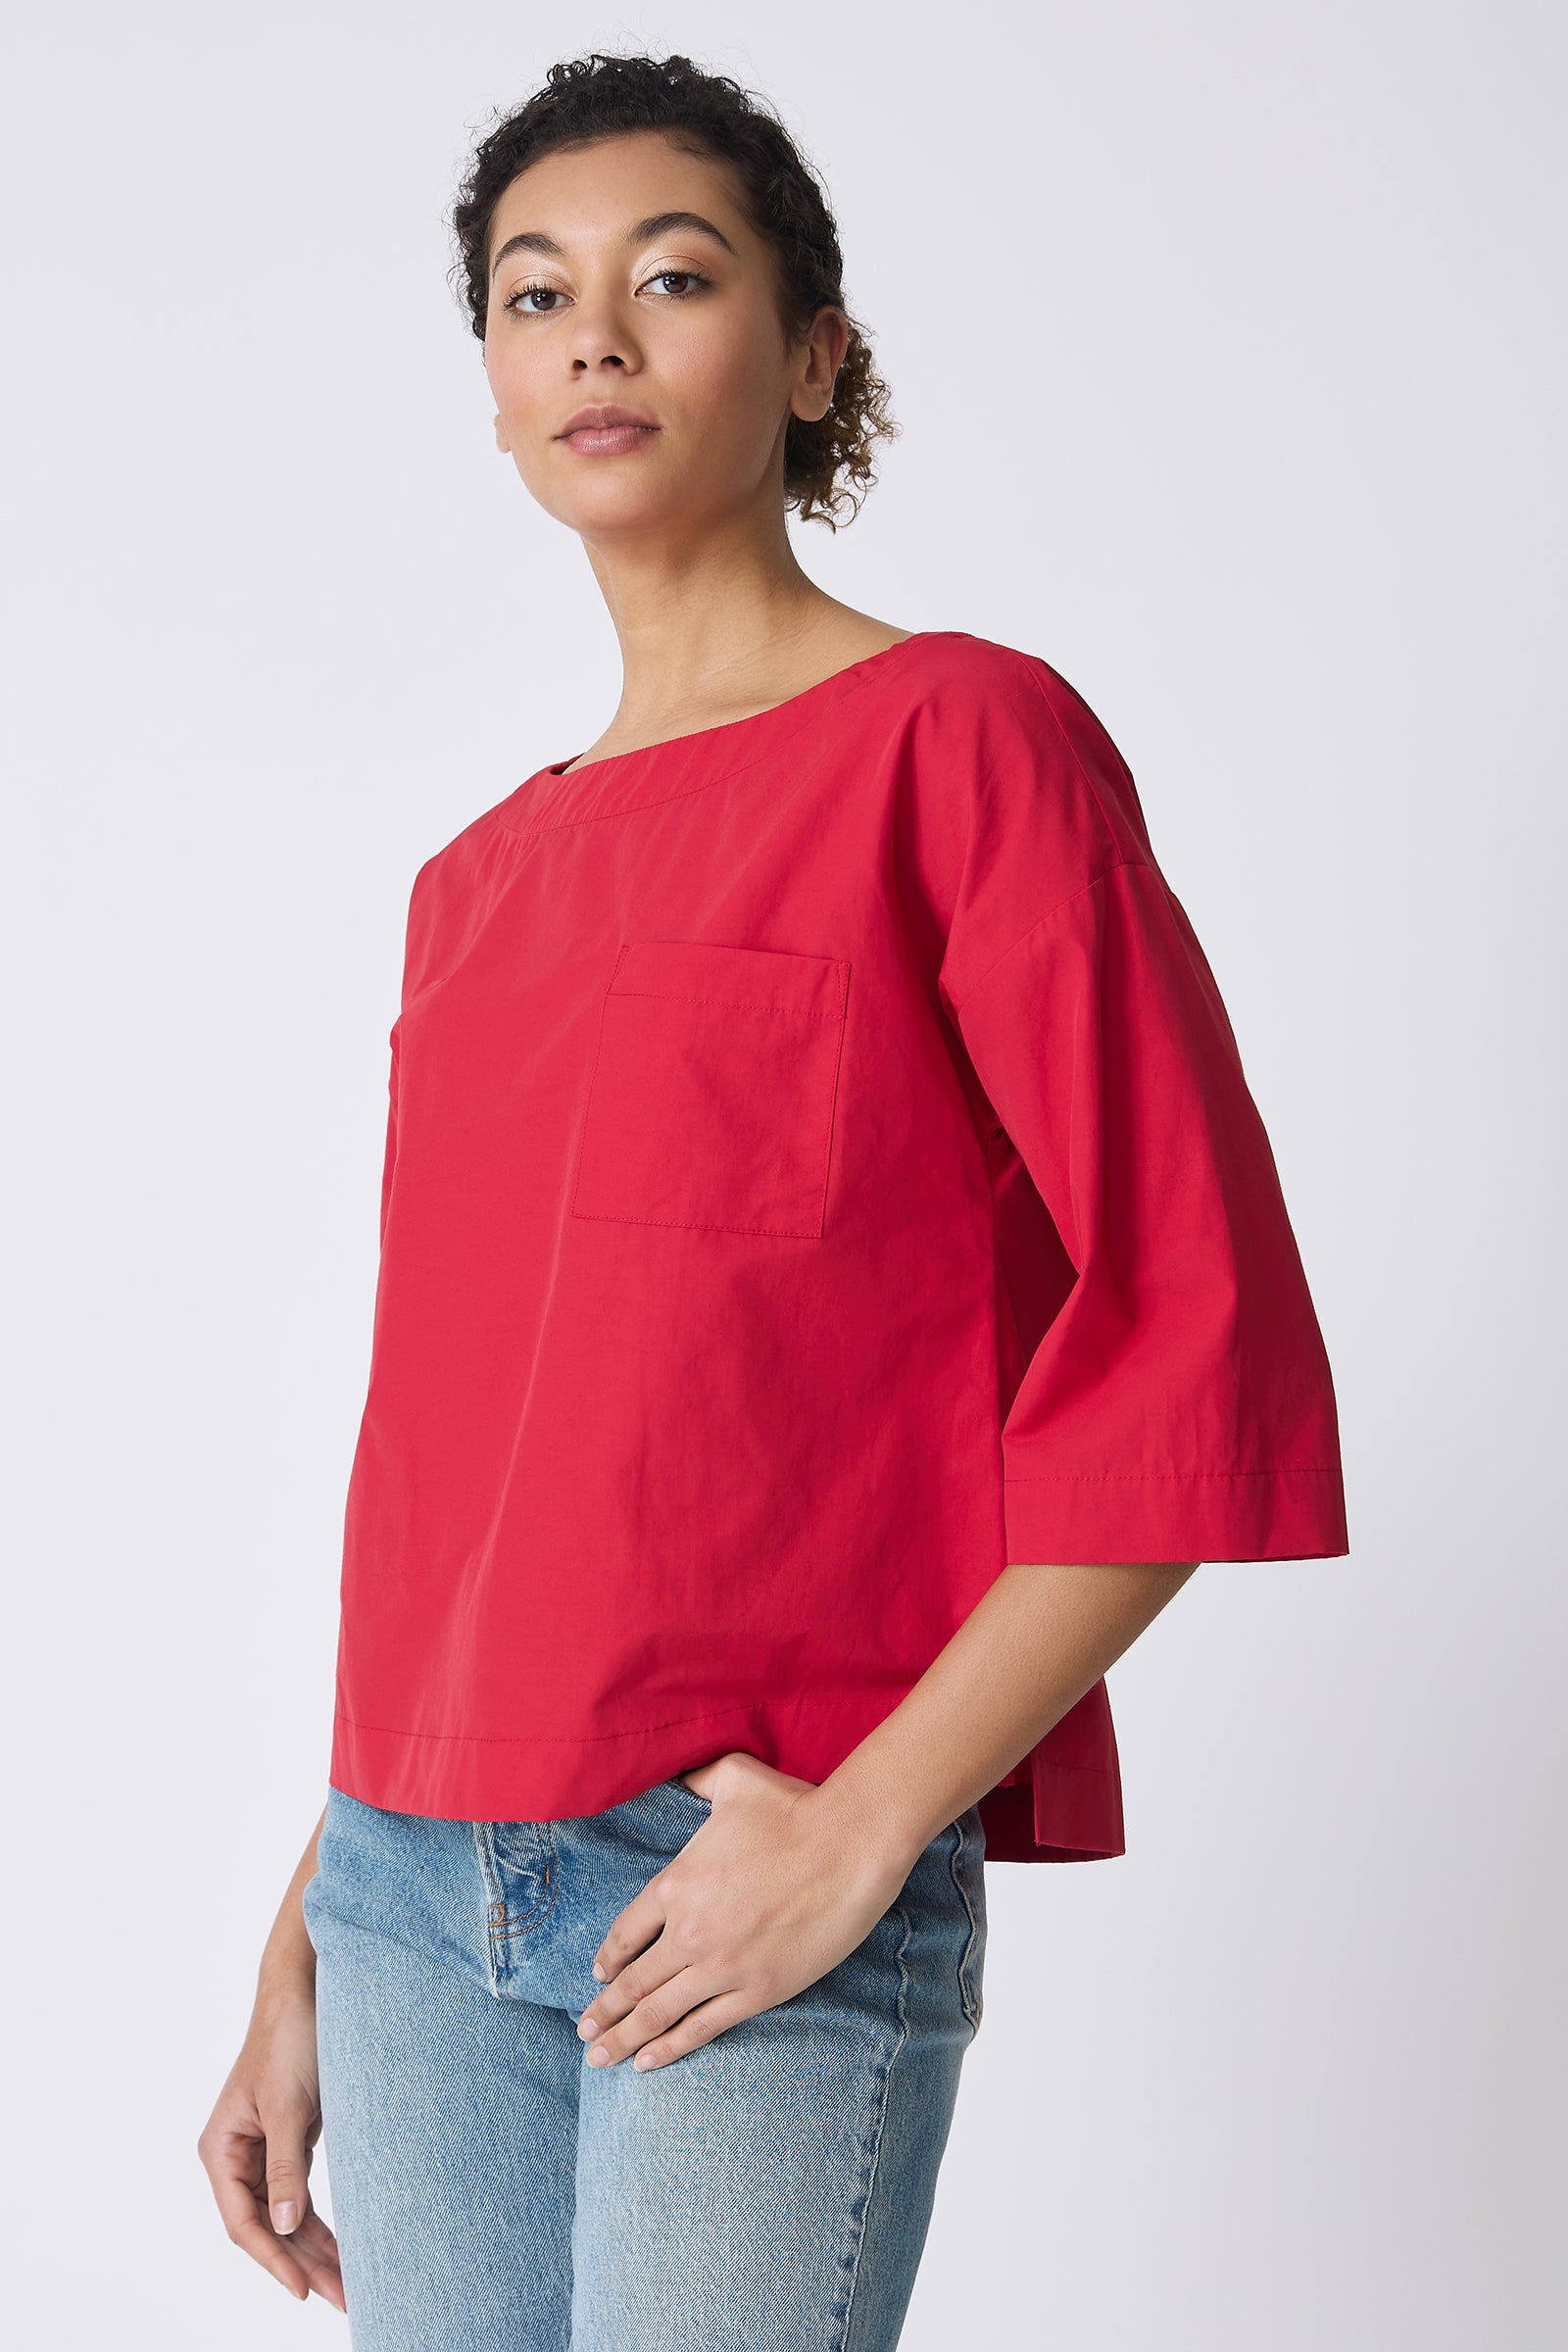 Kal Rieman Carmen Pocket Tee in Red on model with hand in pocket front view